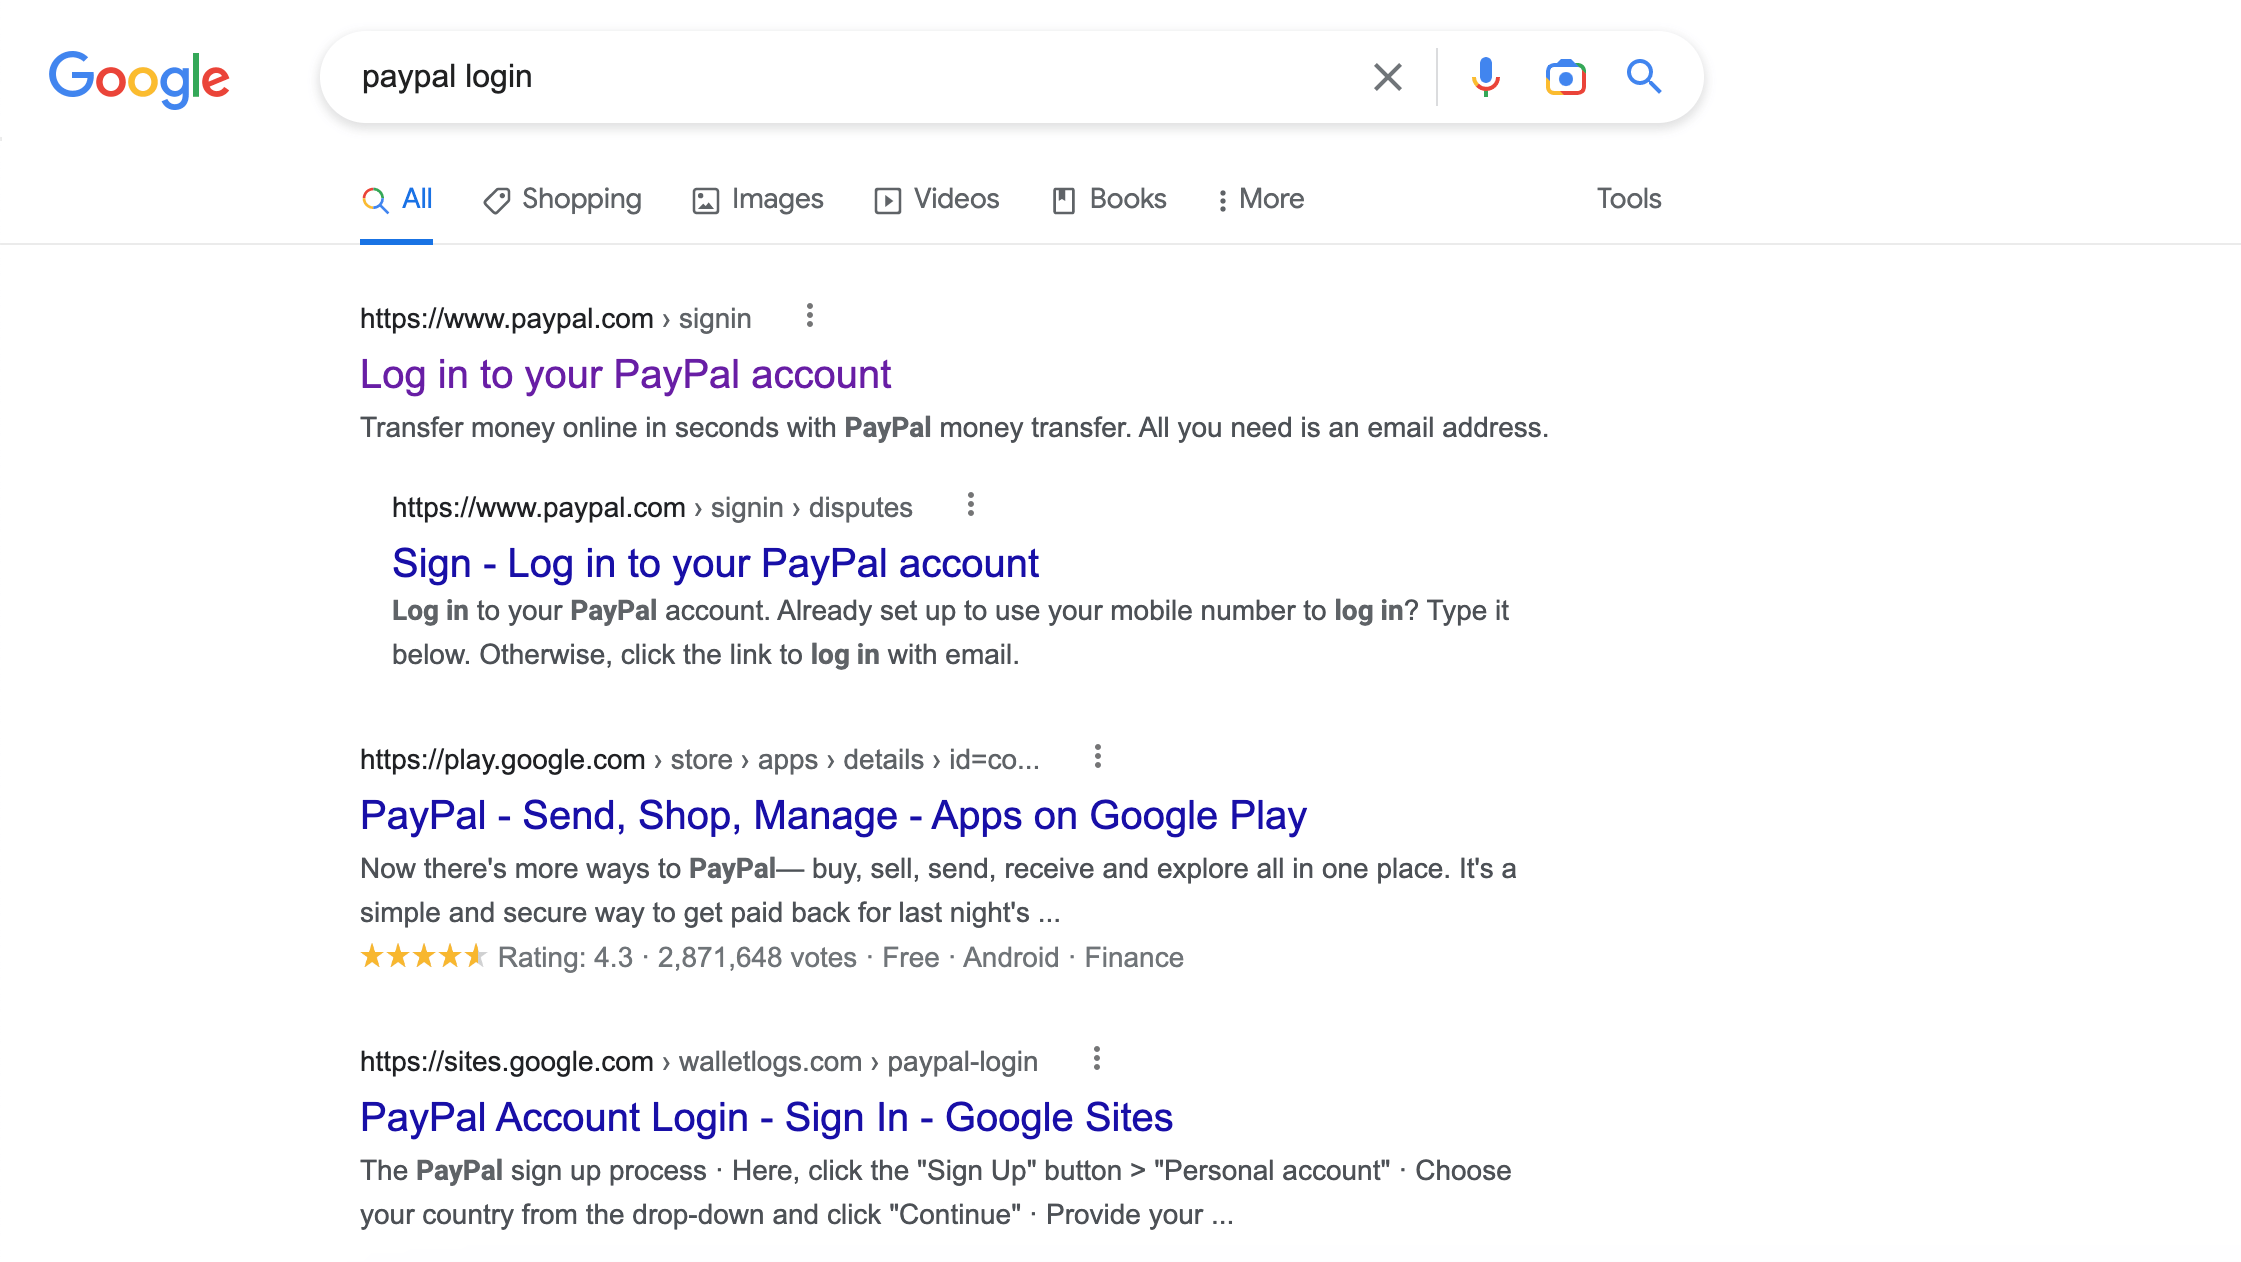 Screenshot: Google search for “PayPal login”, Other